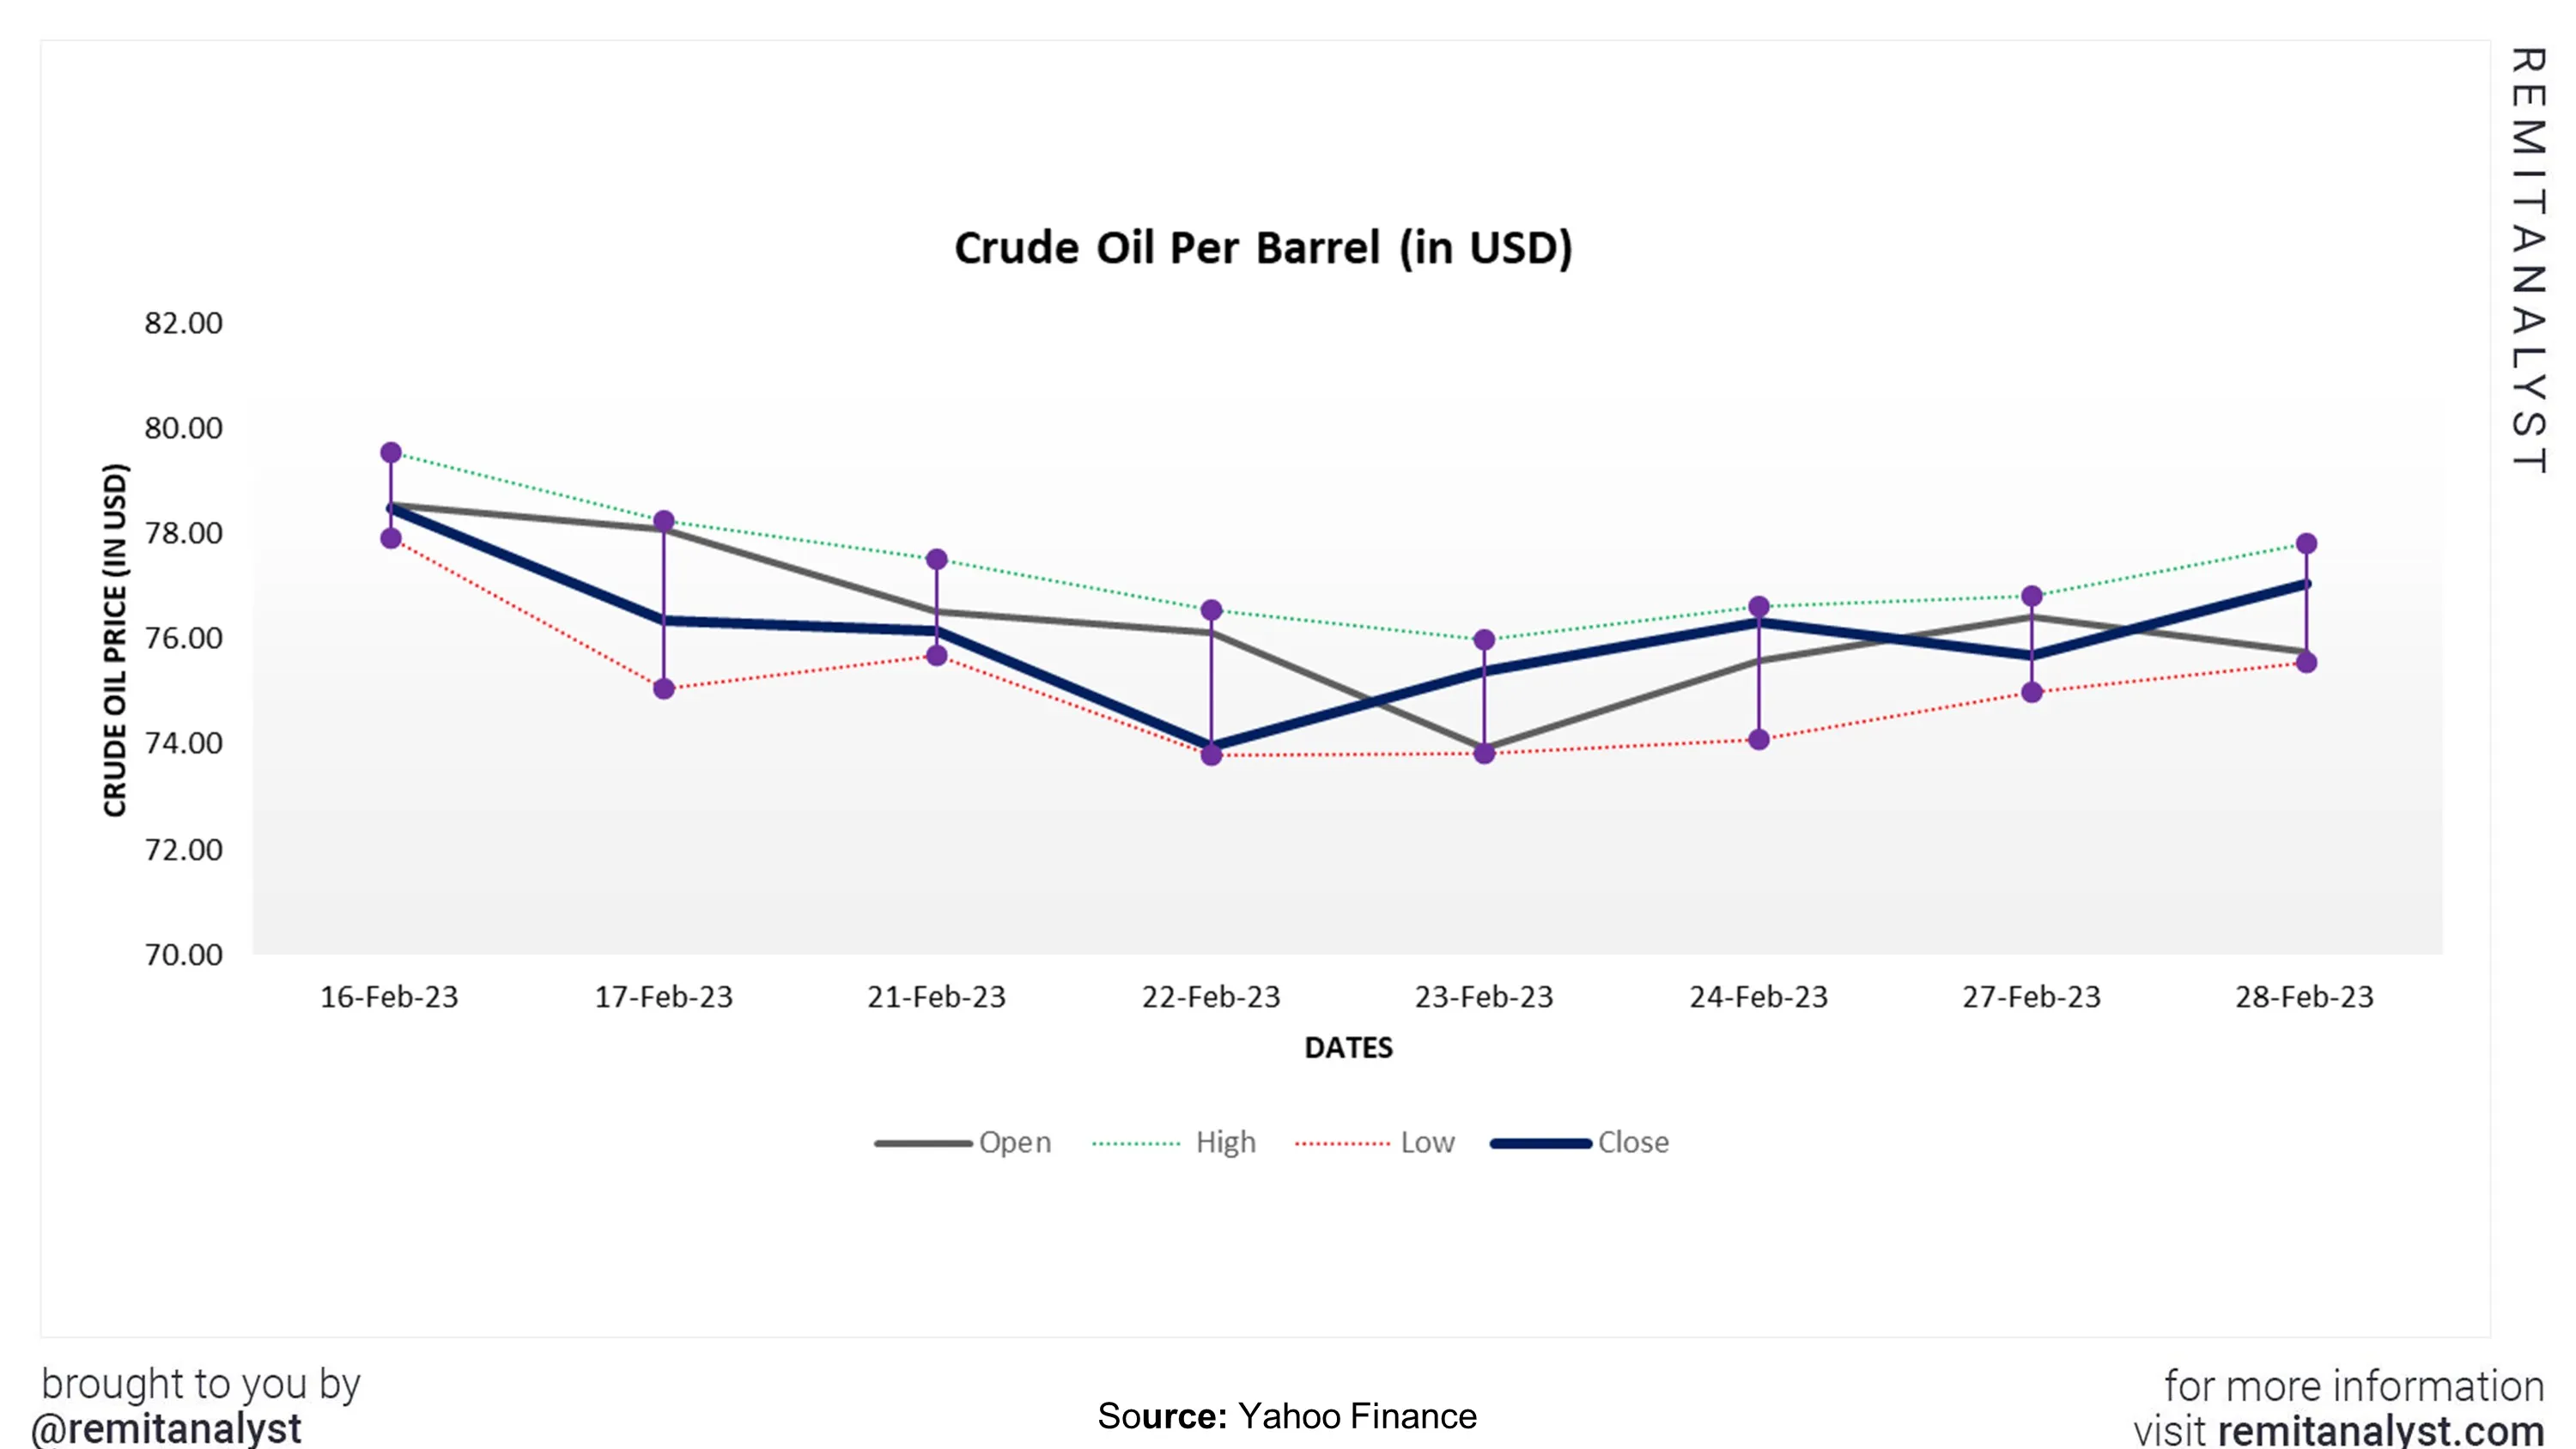 crude-oil-prices-from-16-feb-2023-to-28-feb-2023